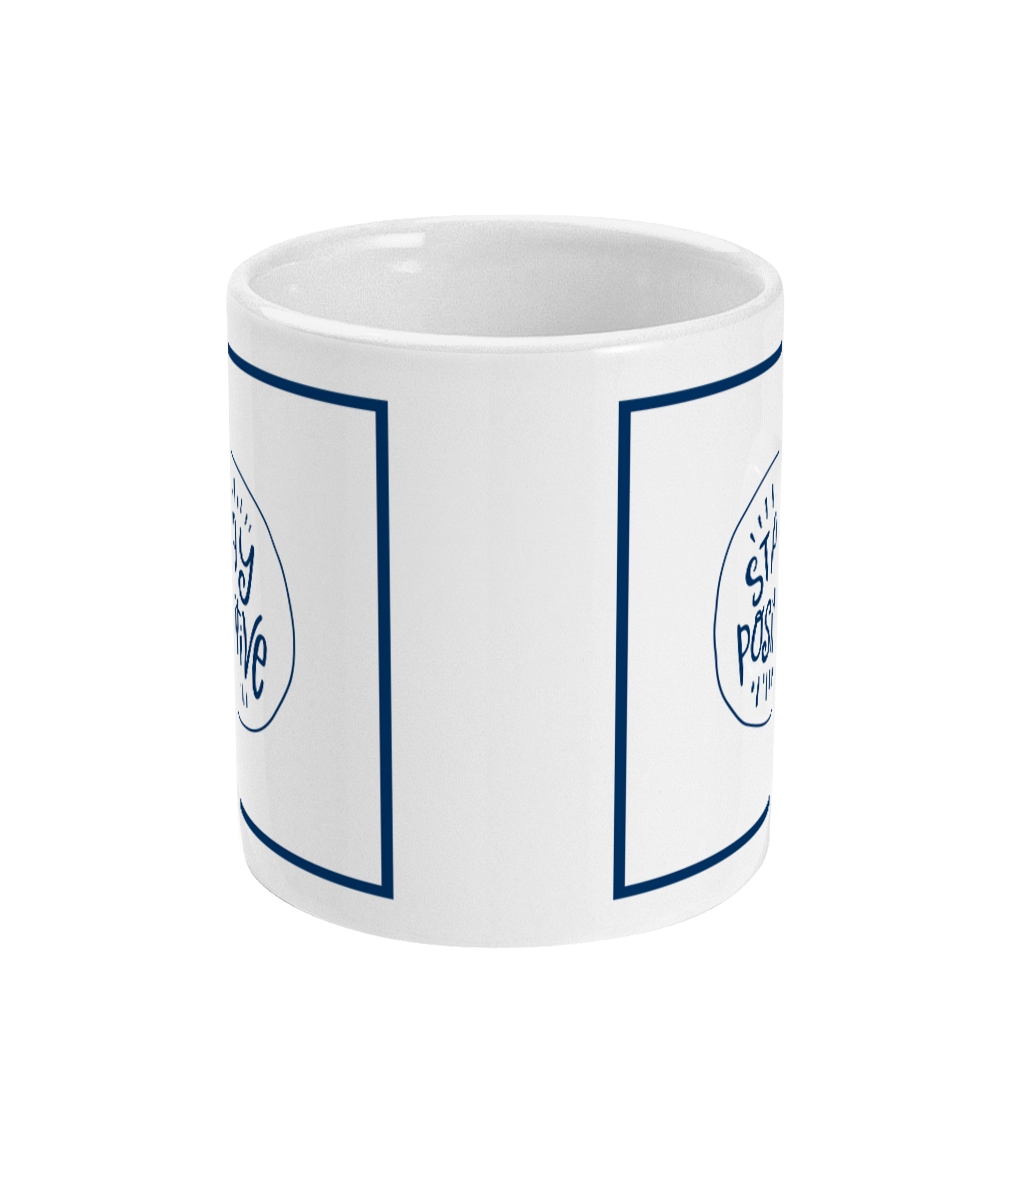 mug with stay positive logo printed on it